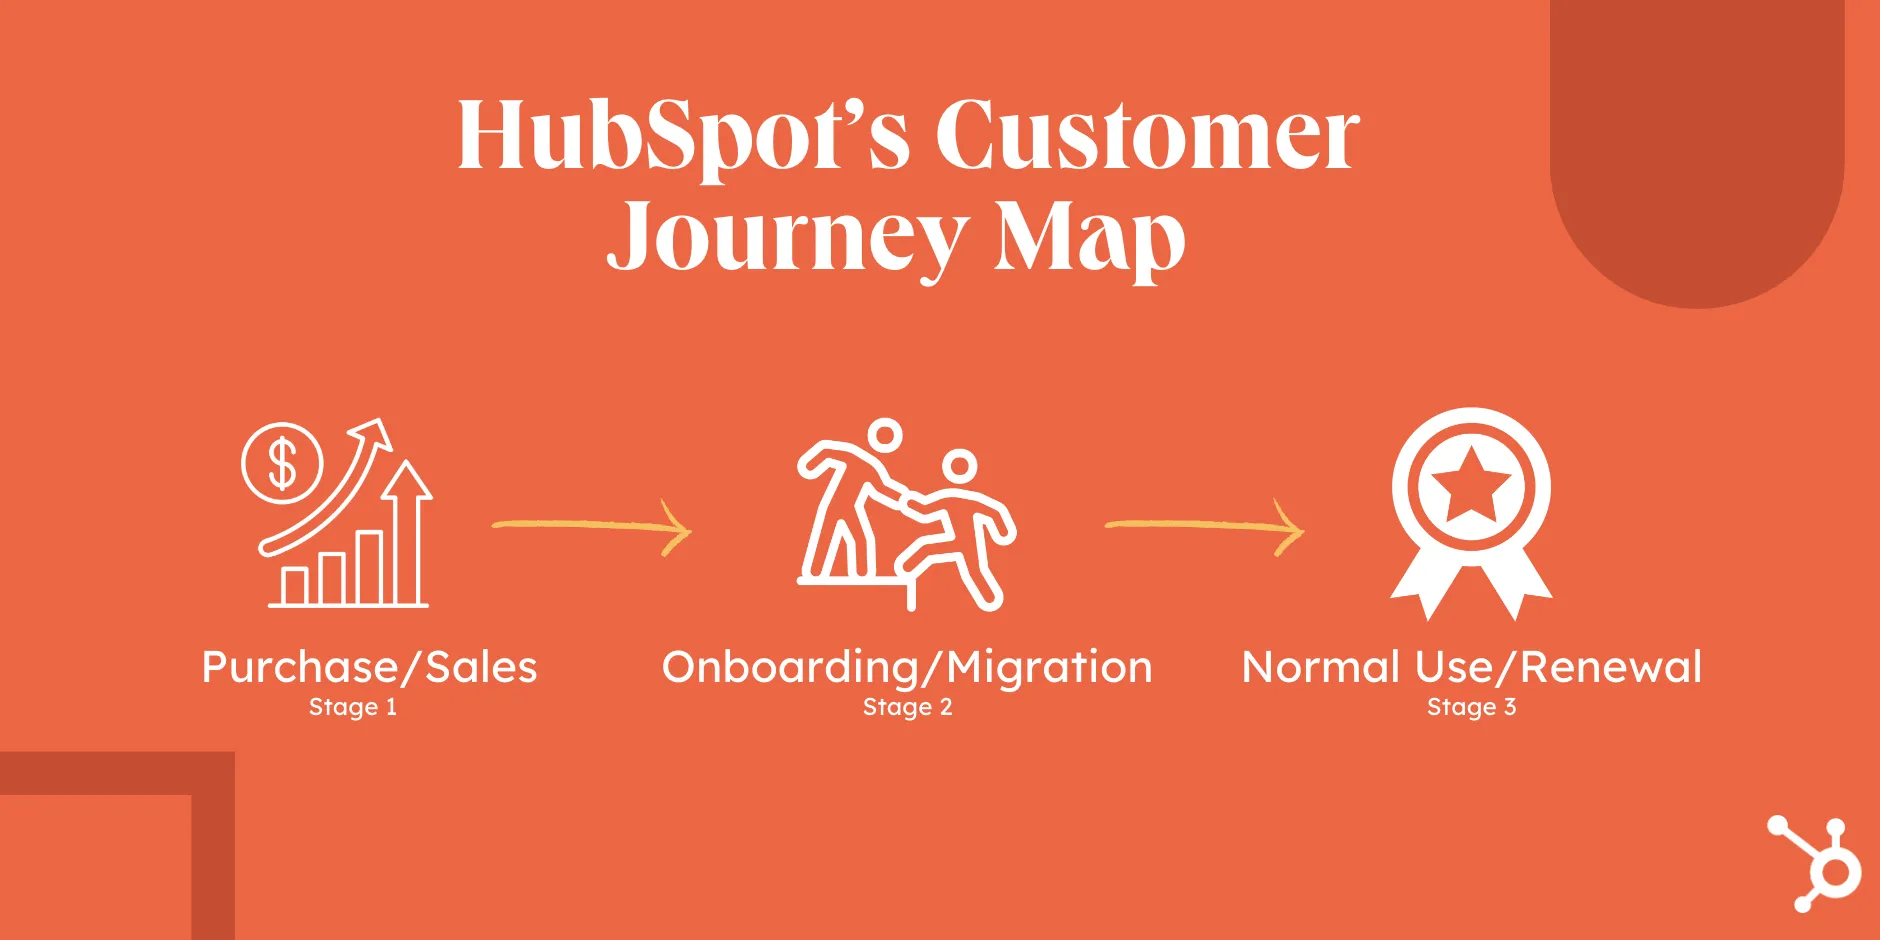 ></center></p><p>At each stage, HubSpot has a specific set of touchpoints to meet customers where they are — like using blog posts to teach customers about marketing and sales, then nurturing them slowly toward a paid subscription. Within later stages, there are several “moments” such as comparing tools, sales negotiations, technical setup, etc.</p><p>The stages may not be the same for you — in fact, your brand will likely develop a set of unique stages of the customer journey. But where do you start? Let’s discuss creating your customer journey map.</p><p>A customer journey map is a visual representation of the customer's experience with a company. It also provides insight into the needs of potential customers at every stage of this journey and the factors that directly or indirectly motivate or inhibit their progress.</p><p>The business can then use this information to improve the customer experience, increase conversions, and boost customer retention.</p><p>The customer journey map is not to be confused with a UX journey map. But, for clarity, let’s distinguish these two below.</p><h2>What is UX journey mapping?</h2><p>A UX journey map represents how a customer experiences their journey toward achieving a specific goal or completing a particular action.</p><p>For example, the term “UX journey mapping” can be used interchangeably with the term “customer journey mapping” if the goal being tracked is the user’s journey toward purchasing a product or service.</p><p>However, UX journey mapping can also be used to map the journey (i.e., actions taken) towards other goals, such as using a specific product feature.</p><h2>Why is customer journey mapping important?</h2><p>While the customer journey might seem straightforward — the company offers a product or service, and customers buy it — for most businesses, it typically isn’t.</p><p>In reality, it’s a complex journey that begins when the customer becomes problem-aware (which might be long before they become product-aware) and then moves through an intricate process of further awareness, consideration, and decision-making.</p><p>The customer is also exposed to multiple external factors (competitor ads, reviews, etc.) and touchpoints with the company (conversations with sales reps, interacting with content, viewing product demos, etc.).</p><p>Keep in mind that 80% of customers consider their experience with a company to be as important as its products.</p><p>By mapping this journey, your marketing, sales, and service teams can understand, visualize, and gain insight into each stage of the process.</p><p>You can then decrease friction along the way and make the journey as helpful and delightful as possible for your leads and customers. Customer journey mapping allows you to understand your customers’ motivations, pain points, and needs — resulting in an increased ability to provide solutions. Customers are 2.4x more likely to stick with a brand when their problems are solved quickly, so don’t miss out on the power of customers.</p><h2>What data is necessary for customer journey mapping?</h2><p>Your customer journey map isn’t just a guess based on how you think customers interact with your brand. It’s a data-driven, research-based operation that analyzes past customer behavior. So, what data should you be looking at?</p><h2>Customer Surveys and Interviews</h2><p>What better way to find out how customers think than to ask them? Customer surveys and interviews will provide first-hand information about the stage of the customer journey, their pain points, and how they use your products to solve their problems.</p><p>Surveys and interviews are referred to as Solicited Data because you have to specifically ask customers to fill out a questionnaire and provide data. Consider sending an NPS Survey to customers or asking for feedback on social media to gather the solicited data necessary for customer journey mapping. However, surveys and interviews won’t tell the whole story. That’s where unsolicited data comes in.</p><h2>Unsolicited Data</h2><p>Unsolicited data refers to all the data you collect from customers without specifically prompting them. Data points like purchase history, time spent on page, email clicks, page views, feedback from your support team, call/chat transcripts, and much more will fill in the gaps in your customer journey mapping strategy.</p><p>Unsolicited data is instrumental and much more plentiful than solicited data. While only a small number of customers will respond to surveys and questionnaires, you can collect valuable data on every customer who interacts with your brand to bolster the effectiveness and accuracy of your customer journey map.</p><p>Breaking down the customer journey, phase by phase, aligning each step with a goal, and restructuring your touchpoints accordingly are essential steps for maximizing customer success.</p><p>Here are a few more benefits to gain from customer journey mapping.</p><h2>1. You can refocus your company with an inbound perspective.</h2><p>Rather than discovering customers through outbound marketing, you can have your customers find you with the help of inbound marketing.</p><p>Outbound marketing involves tactics targeted at generalized or uninterested audiences and seeks to interrupt prospects’ daily lives. Outbound marketing is costly and inefficient. It annoys and deters customers and prospects.</p><p>Inbound marketing involves creating helpful content that customers are already looking for. You grab their attention first and focus on the sales later.</p><p>By mapping out the customer journey, you can understand what’s interesting and helpful to your customers and what’s turning them away.</p><p><center><a href=